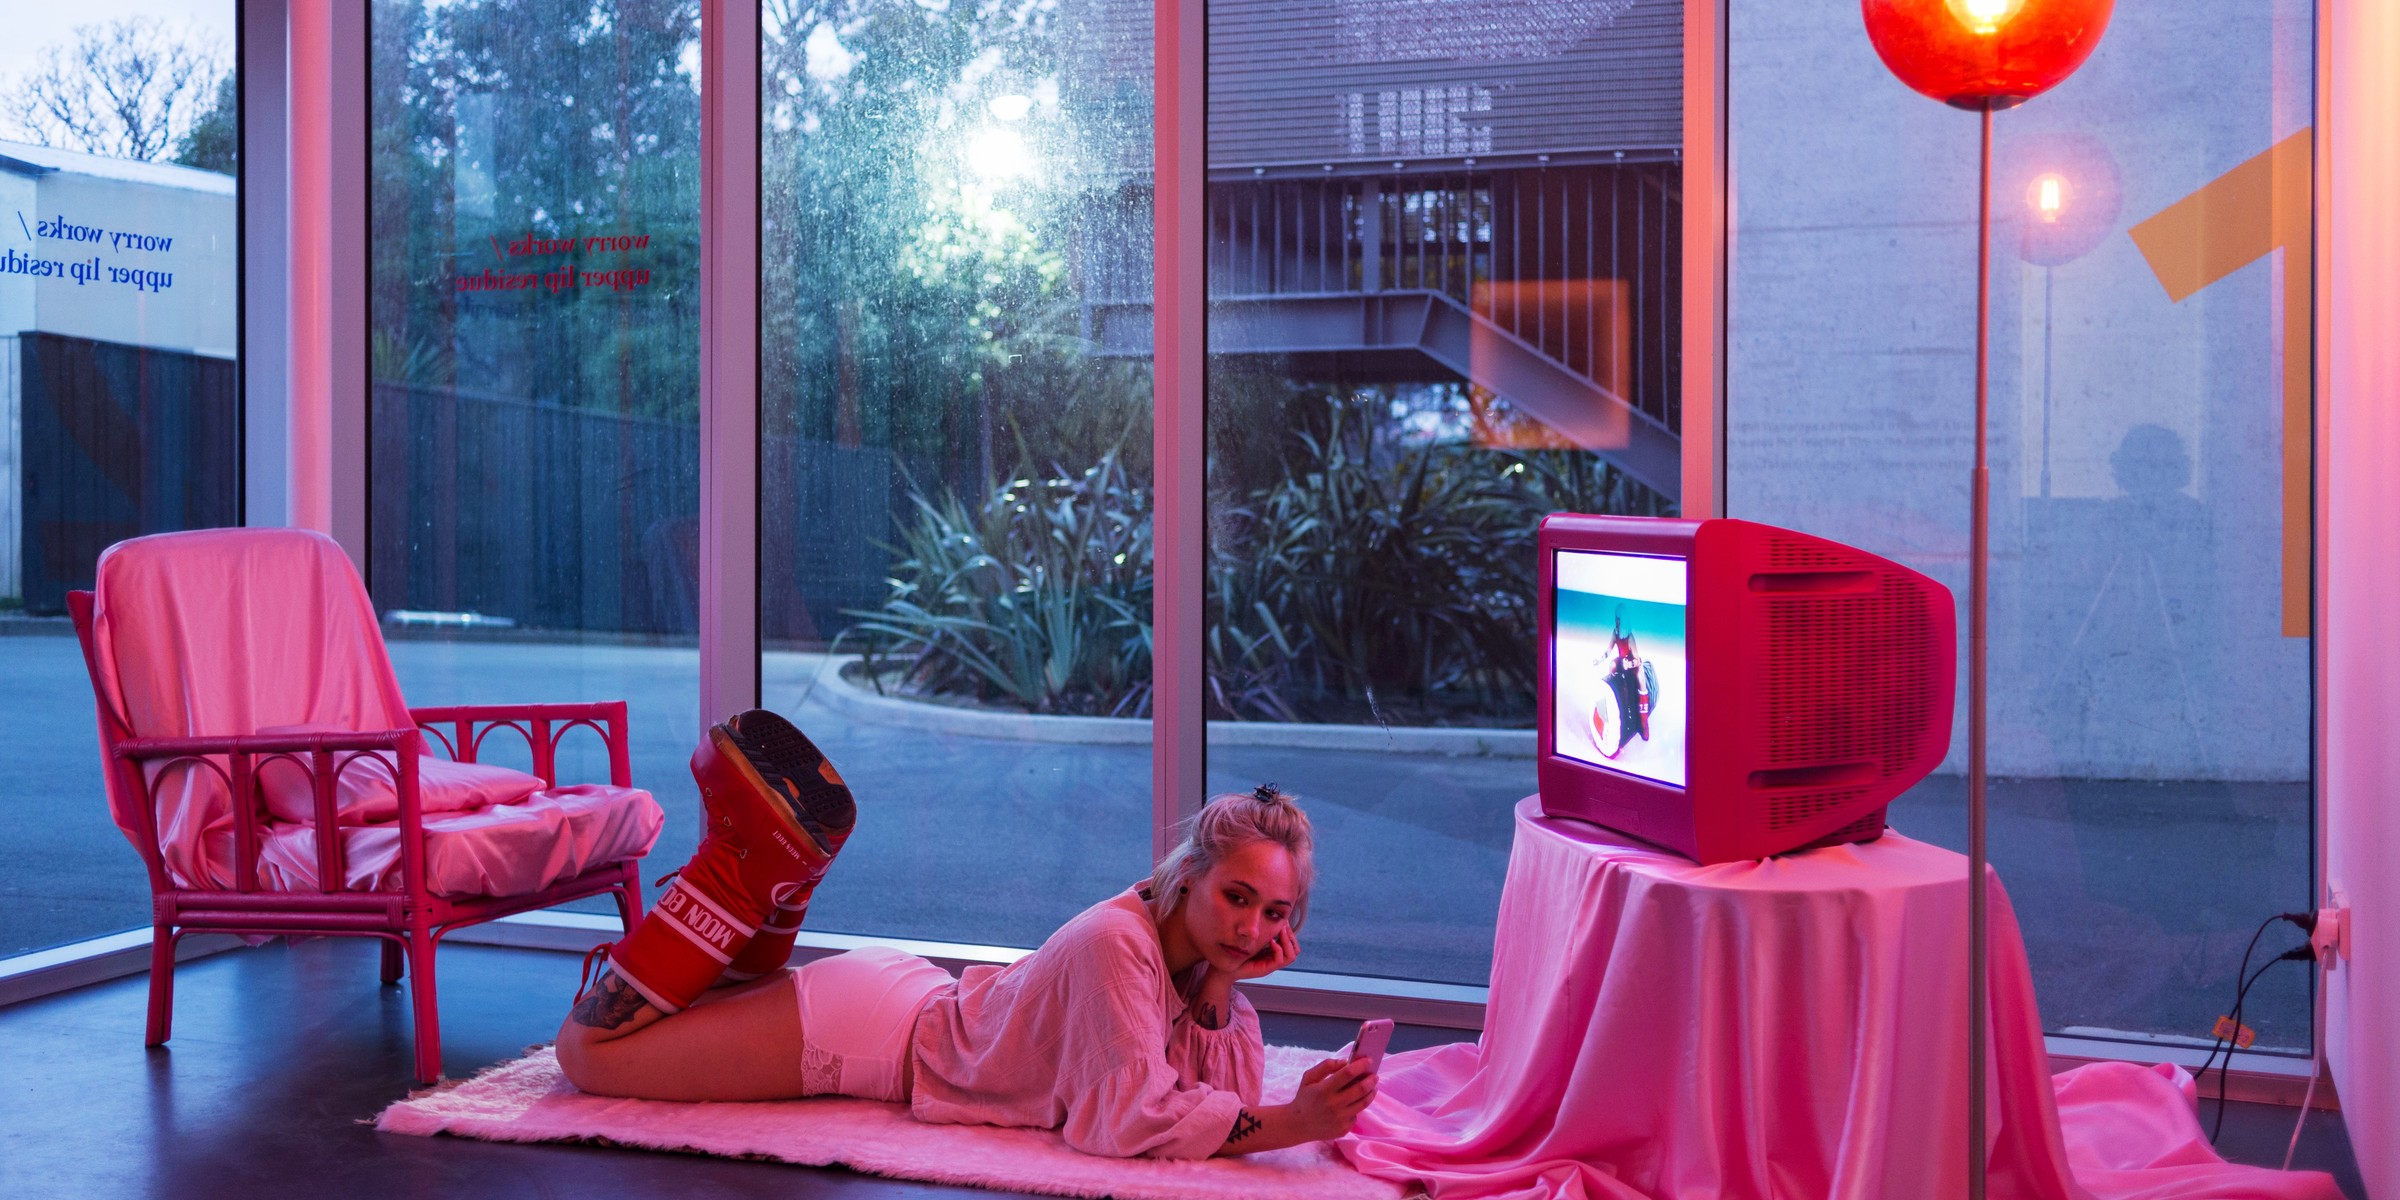 In a glass gallery filled with pink light, Emiko Sheehan lies on a small rug, with a TV in front of her.